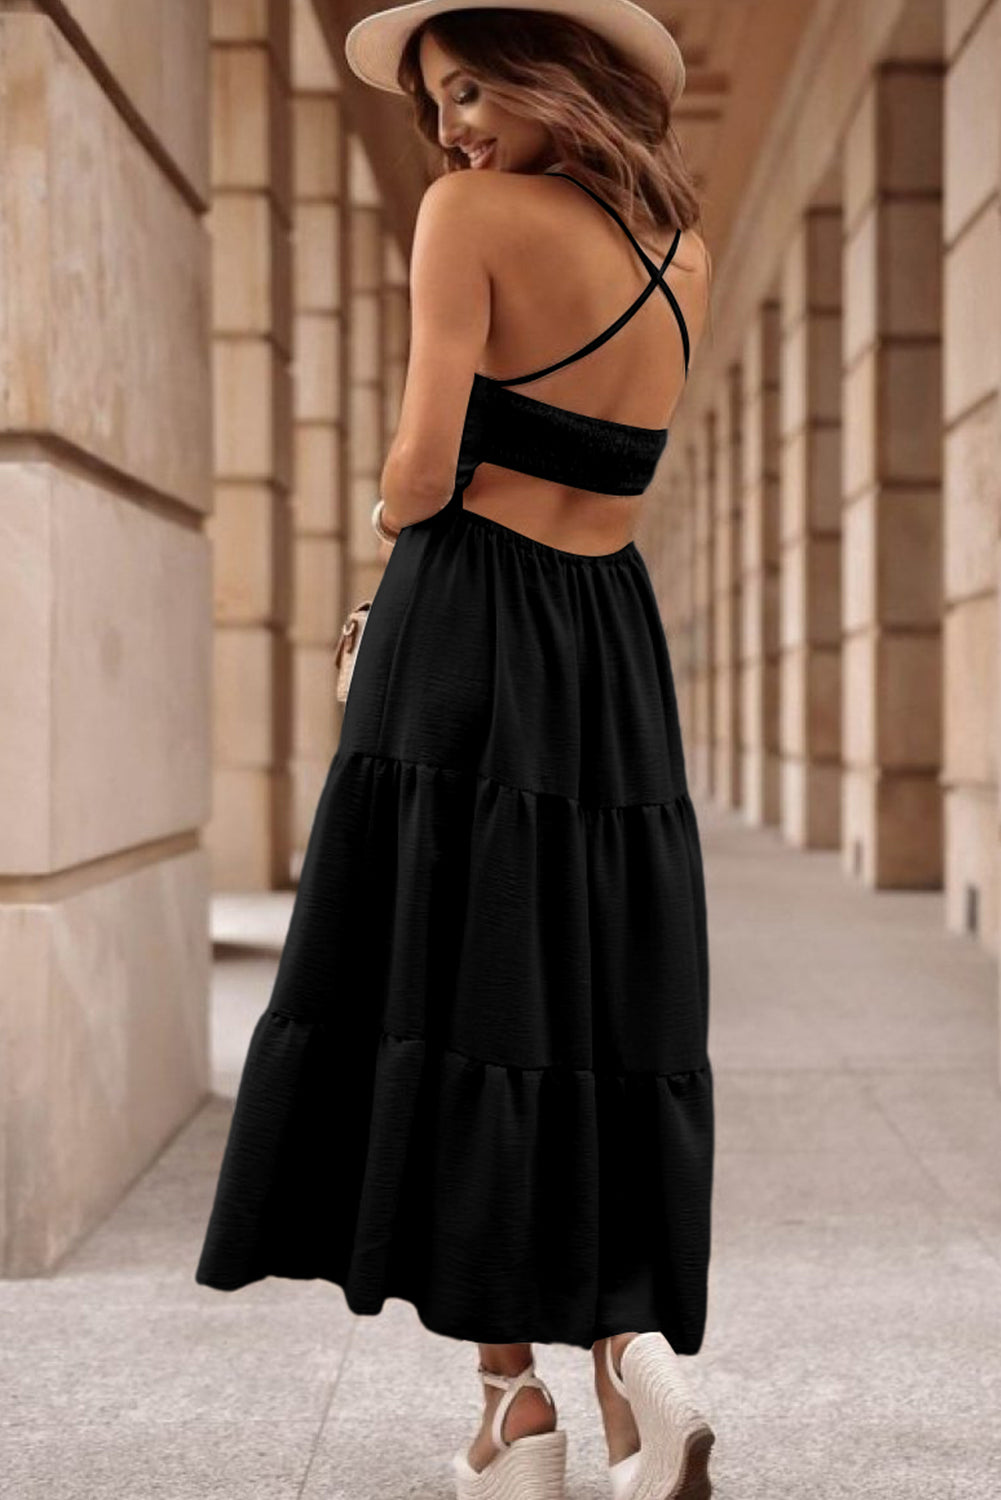 Black Crossover Backless Bodice Tiered Maxi Dress